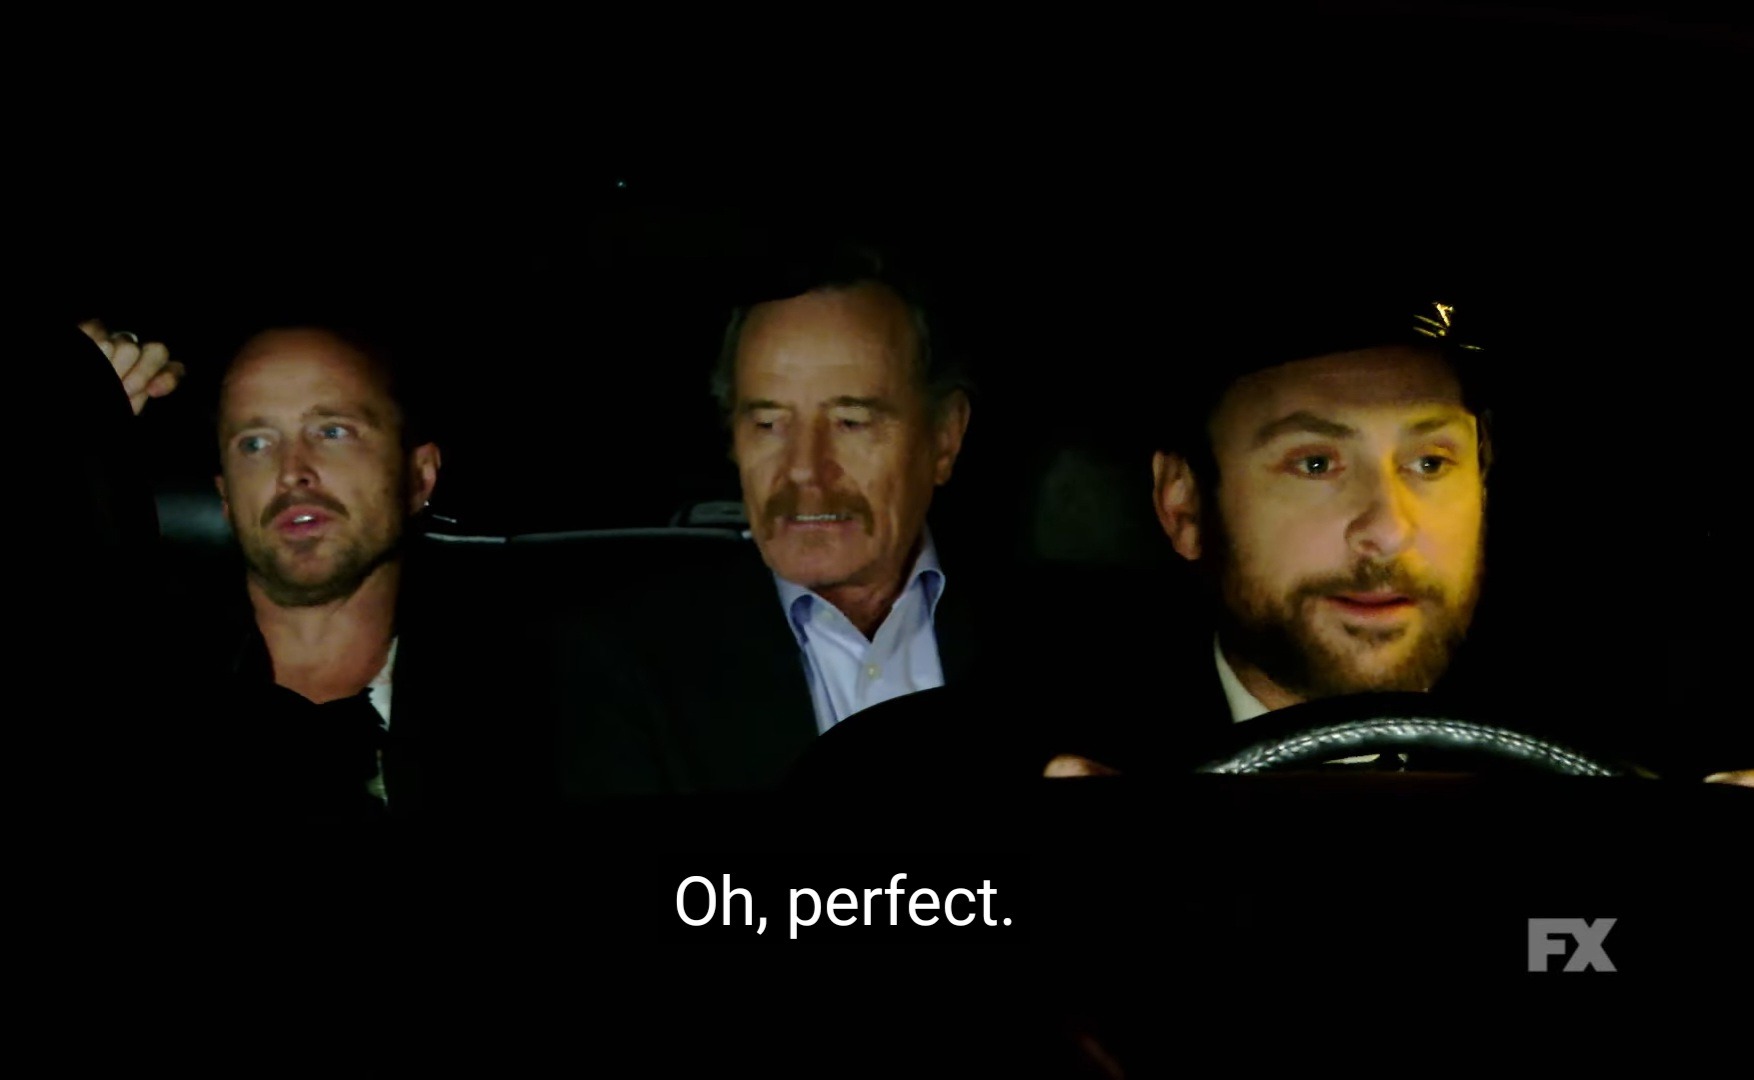 heisenpink:Bryan Cranston and Aaron Paul in the trailer of IASIP Season 16!! - “They are playing themselves but we (the gang) are convinced that they’re the dad from Malcolm in The Middle and Malcolm.” - Charlie